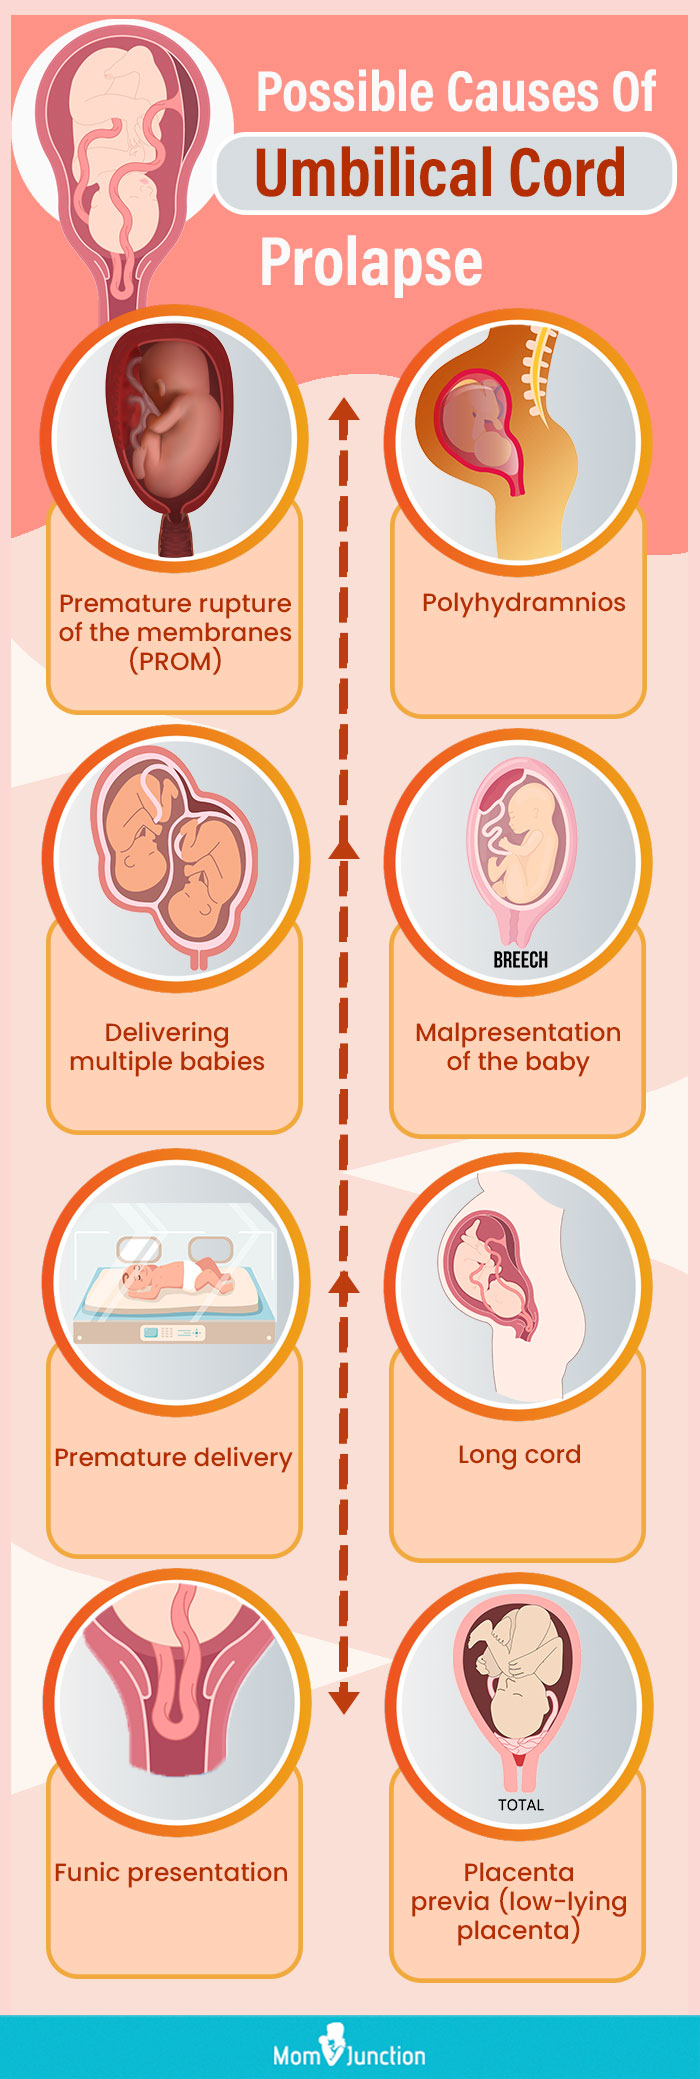 possible causes of umbilical cord prolapse (infographic)